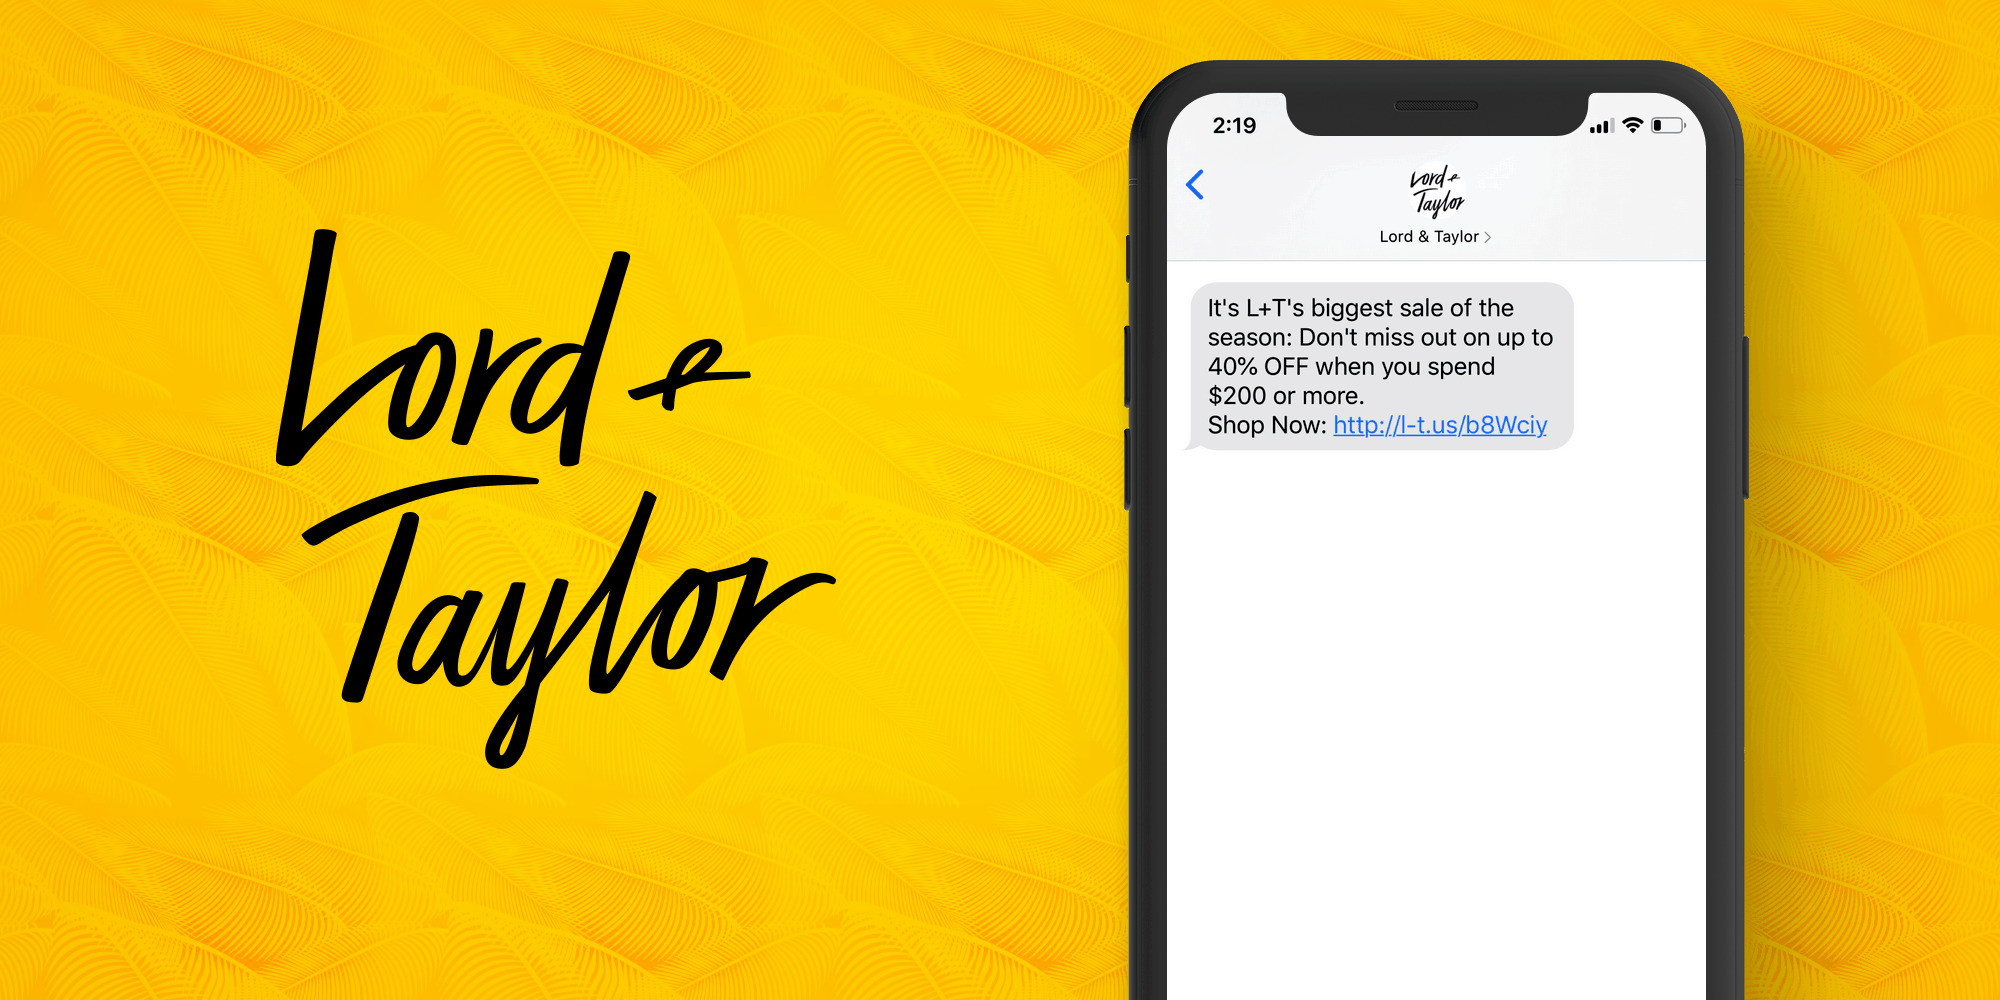 Lord Taylor SMS Marketing Example - 50 Examples of Brands Using SMS Marketing